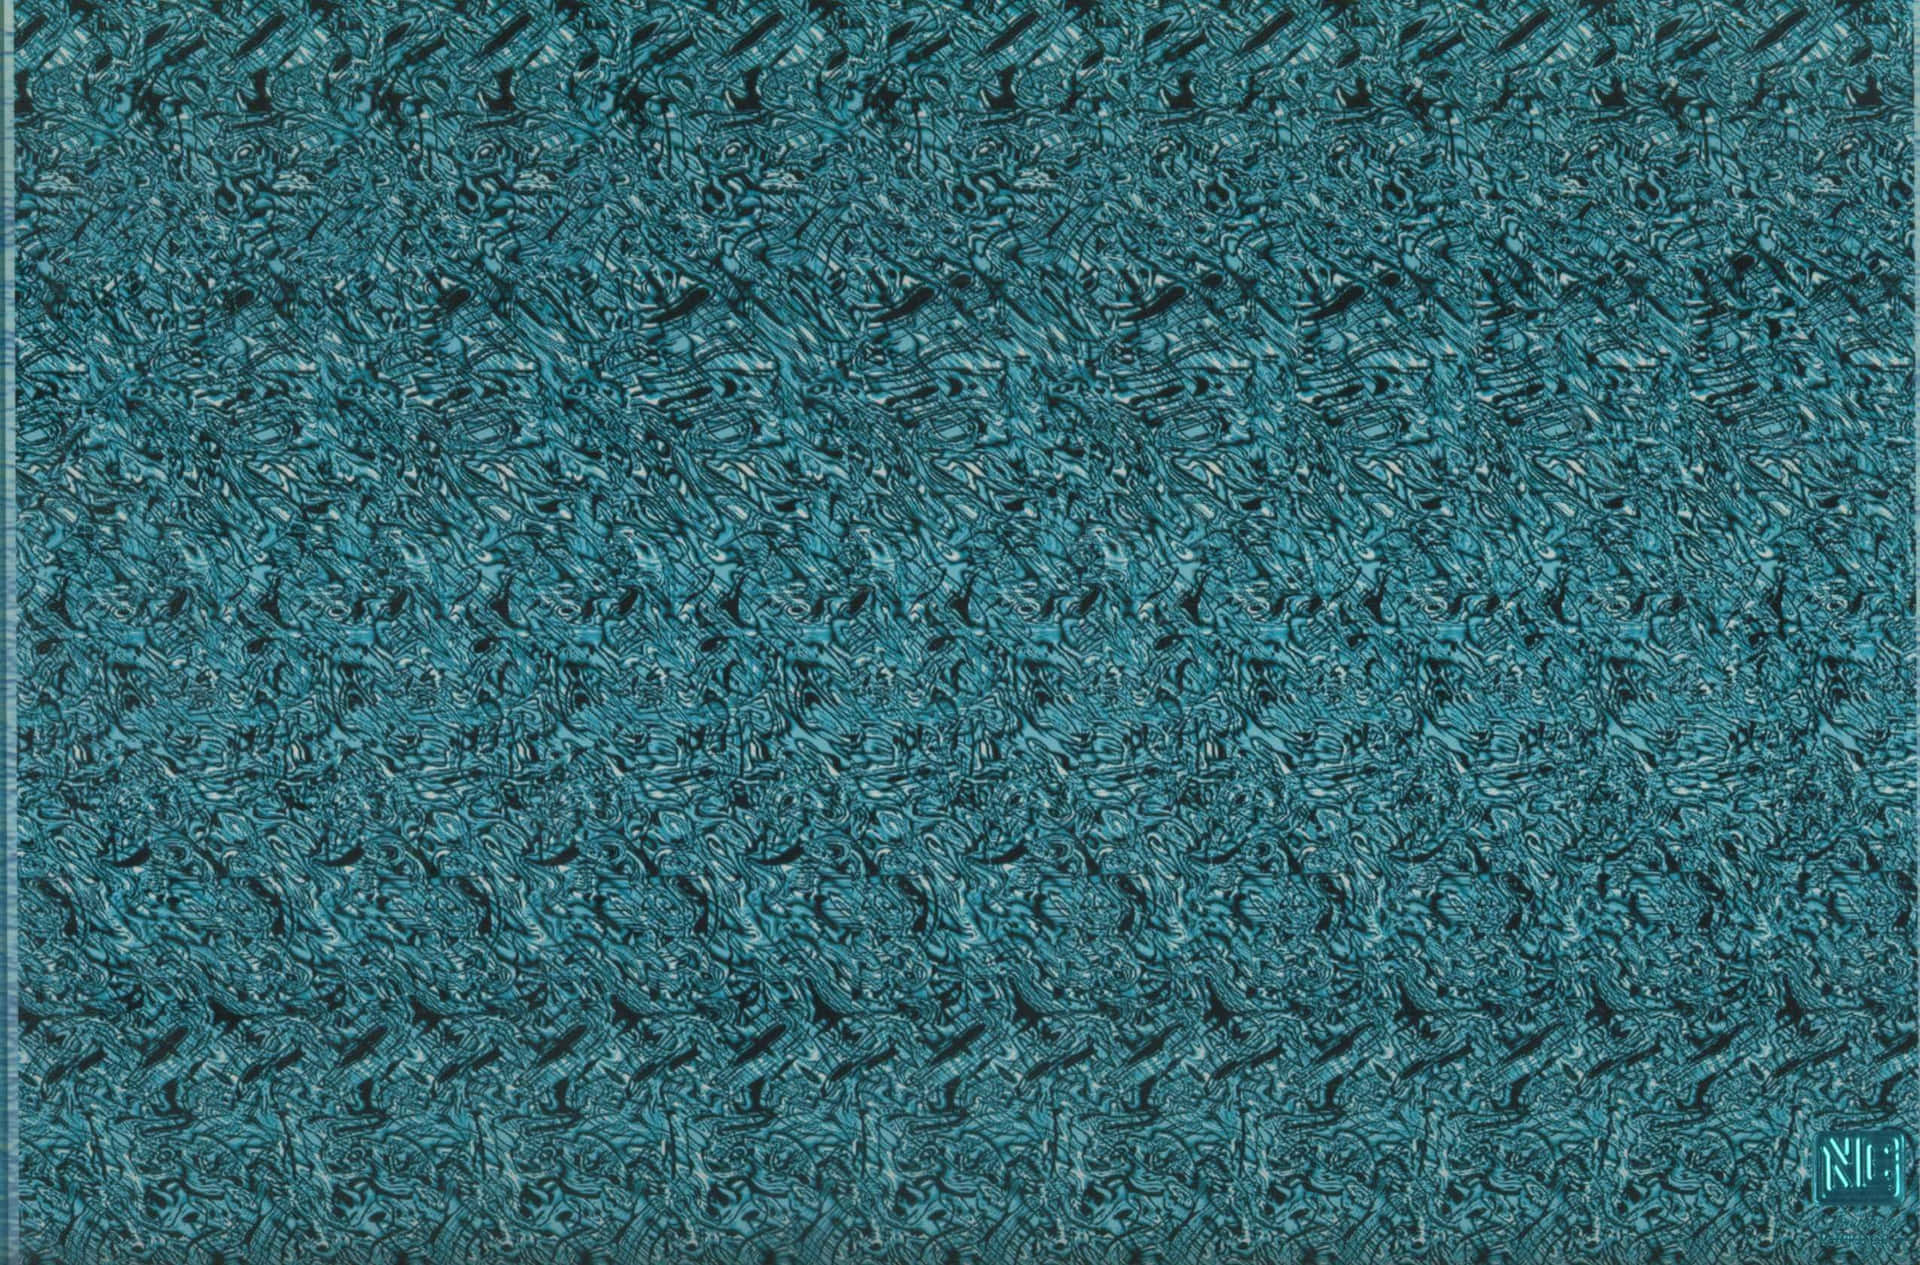 Incredible colors are hidden beneath the surface of this 3D Magic Eye illusion